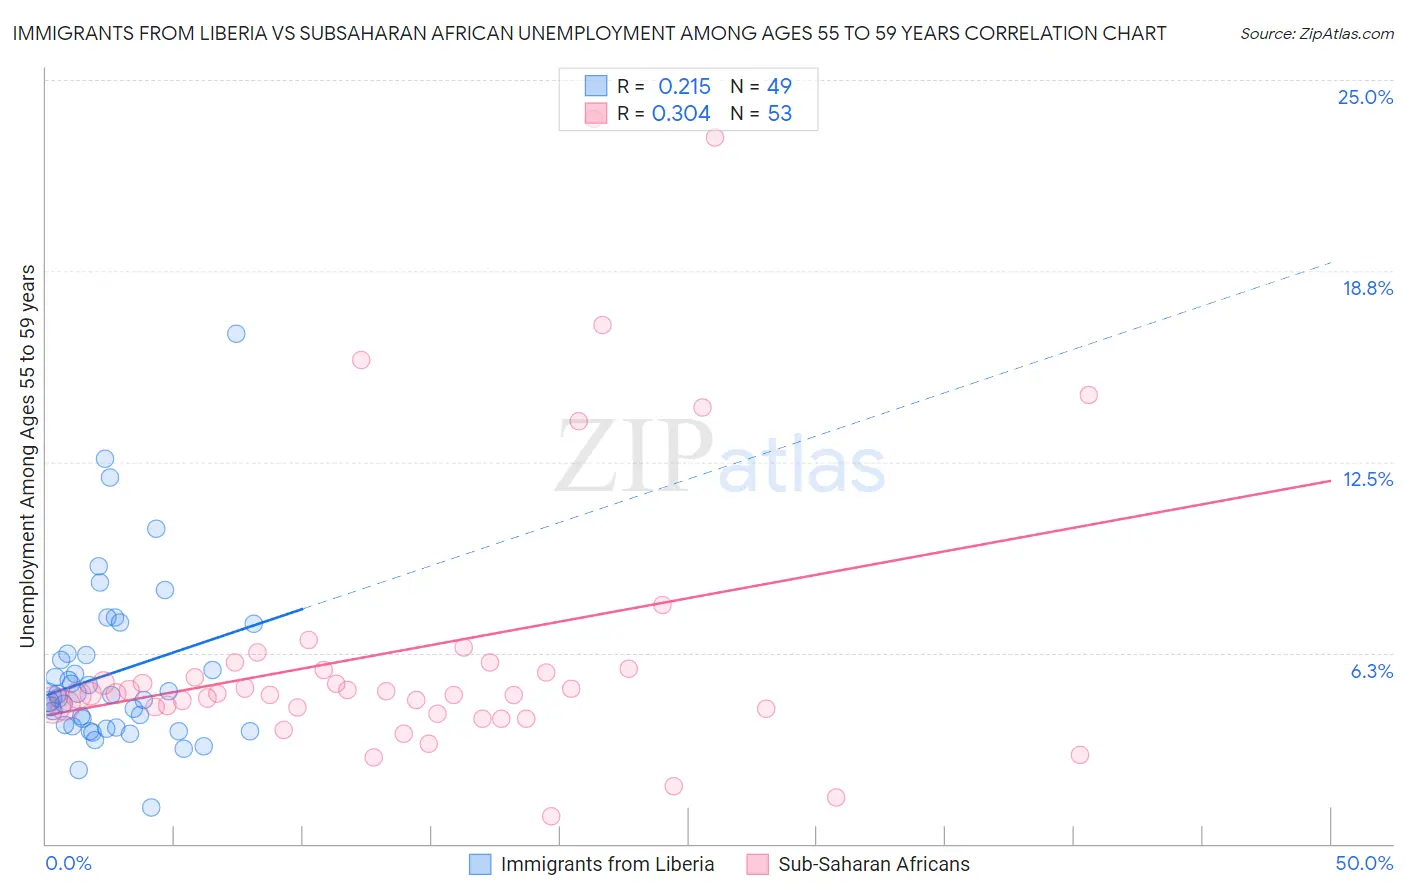 Immigrants from Liberia vs Subsaharan African Unemployment Among Ages 55 to 59 years